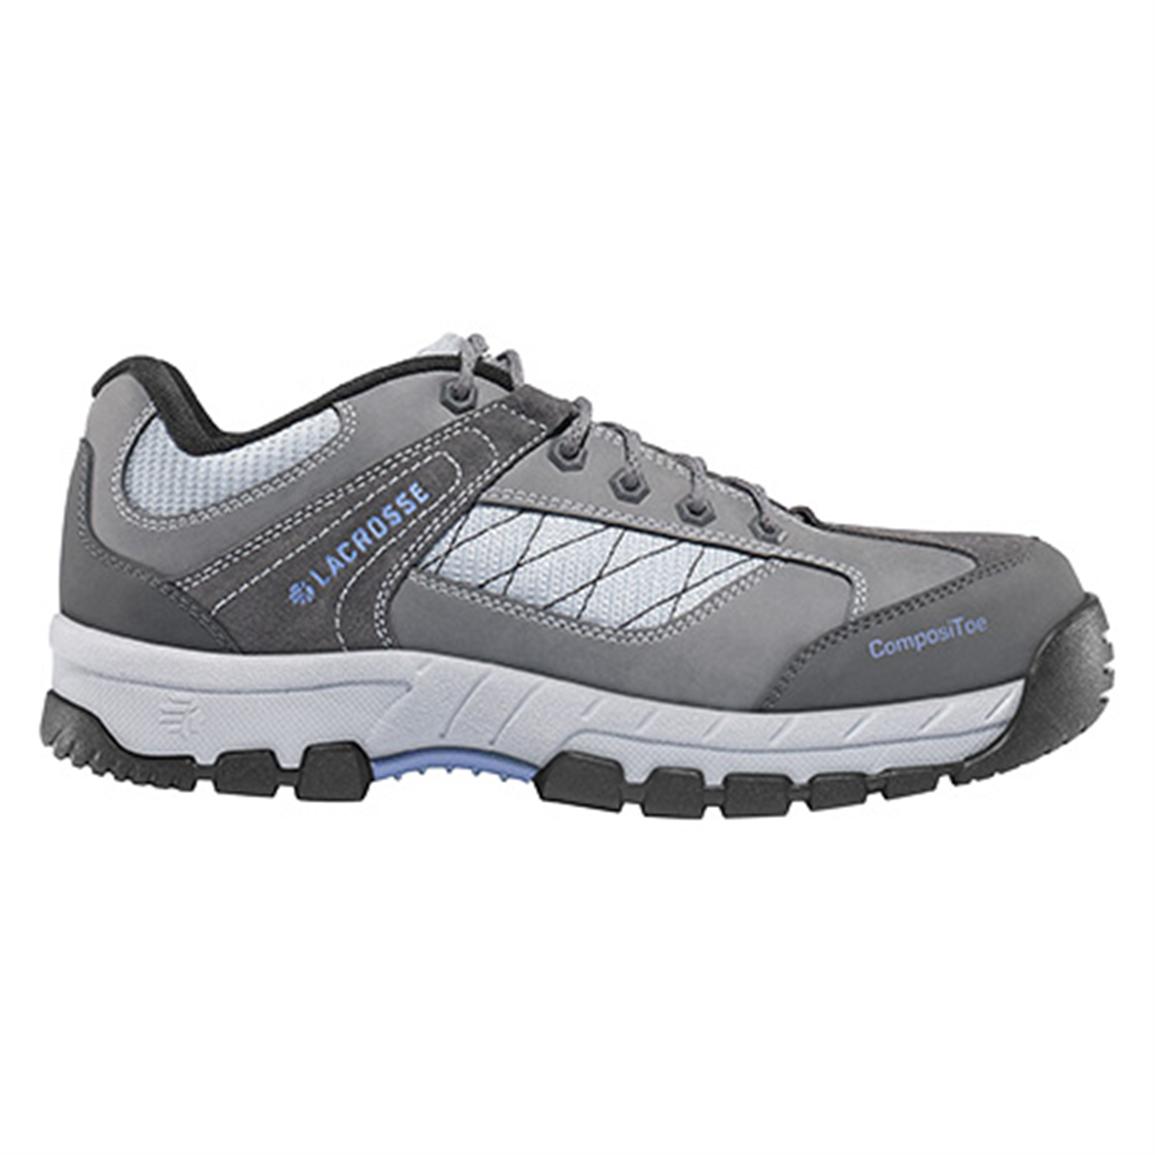 Women's LaCrosse® Quickness NMT Non-metallic Safety Toe Work Shoes ...